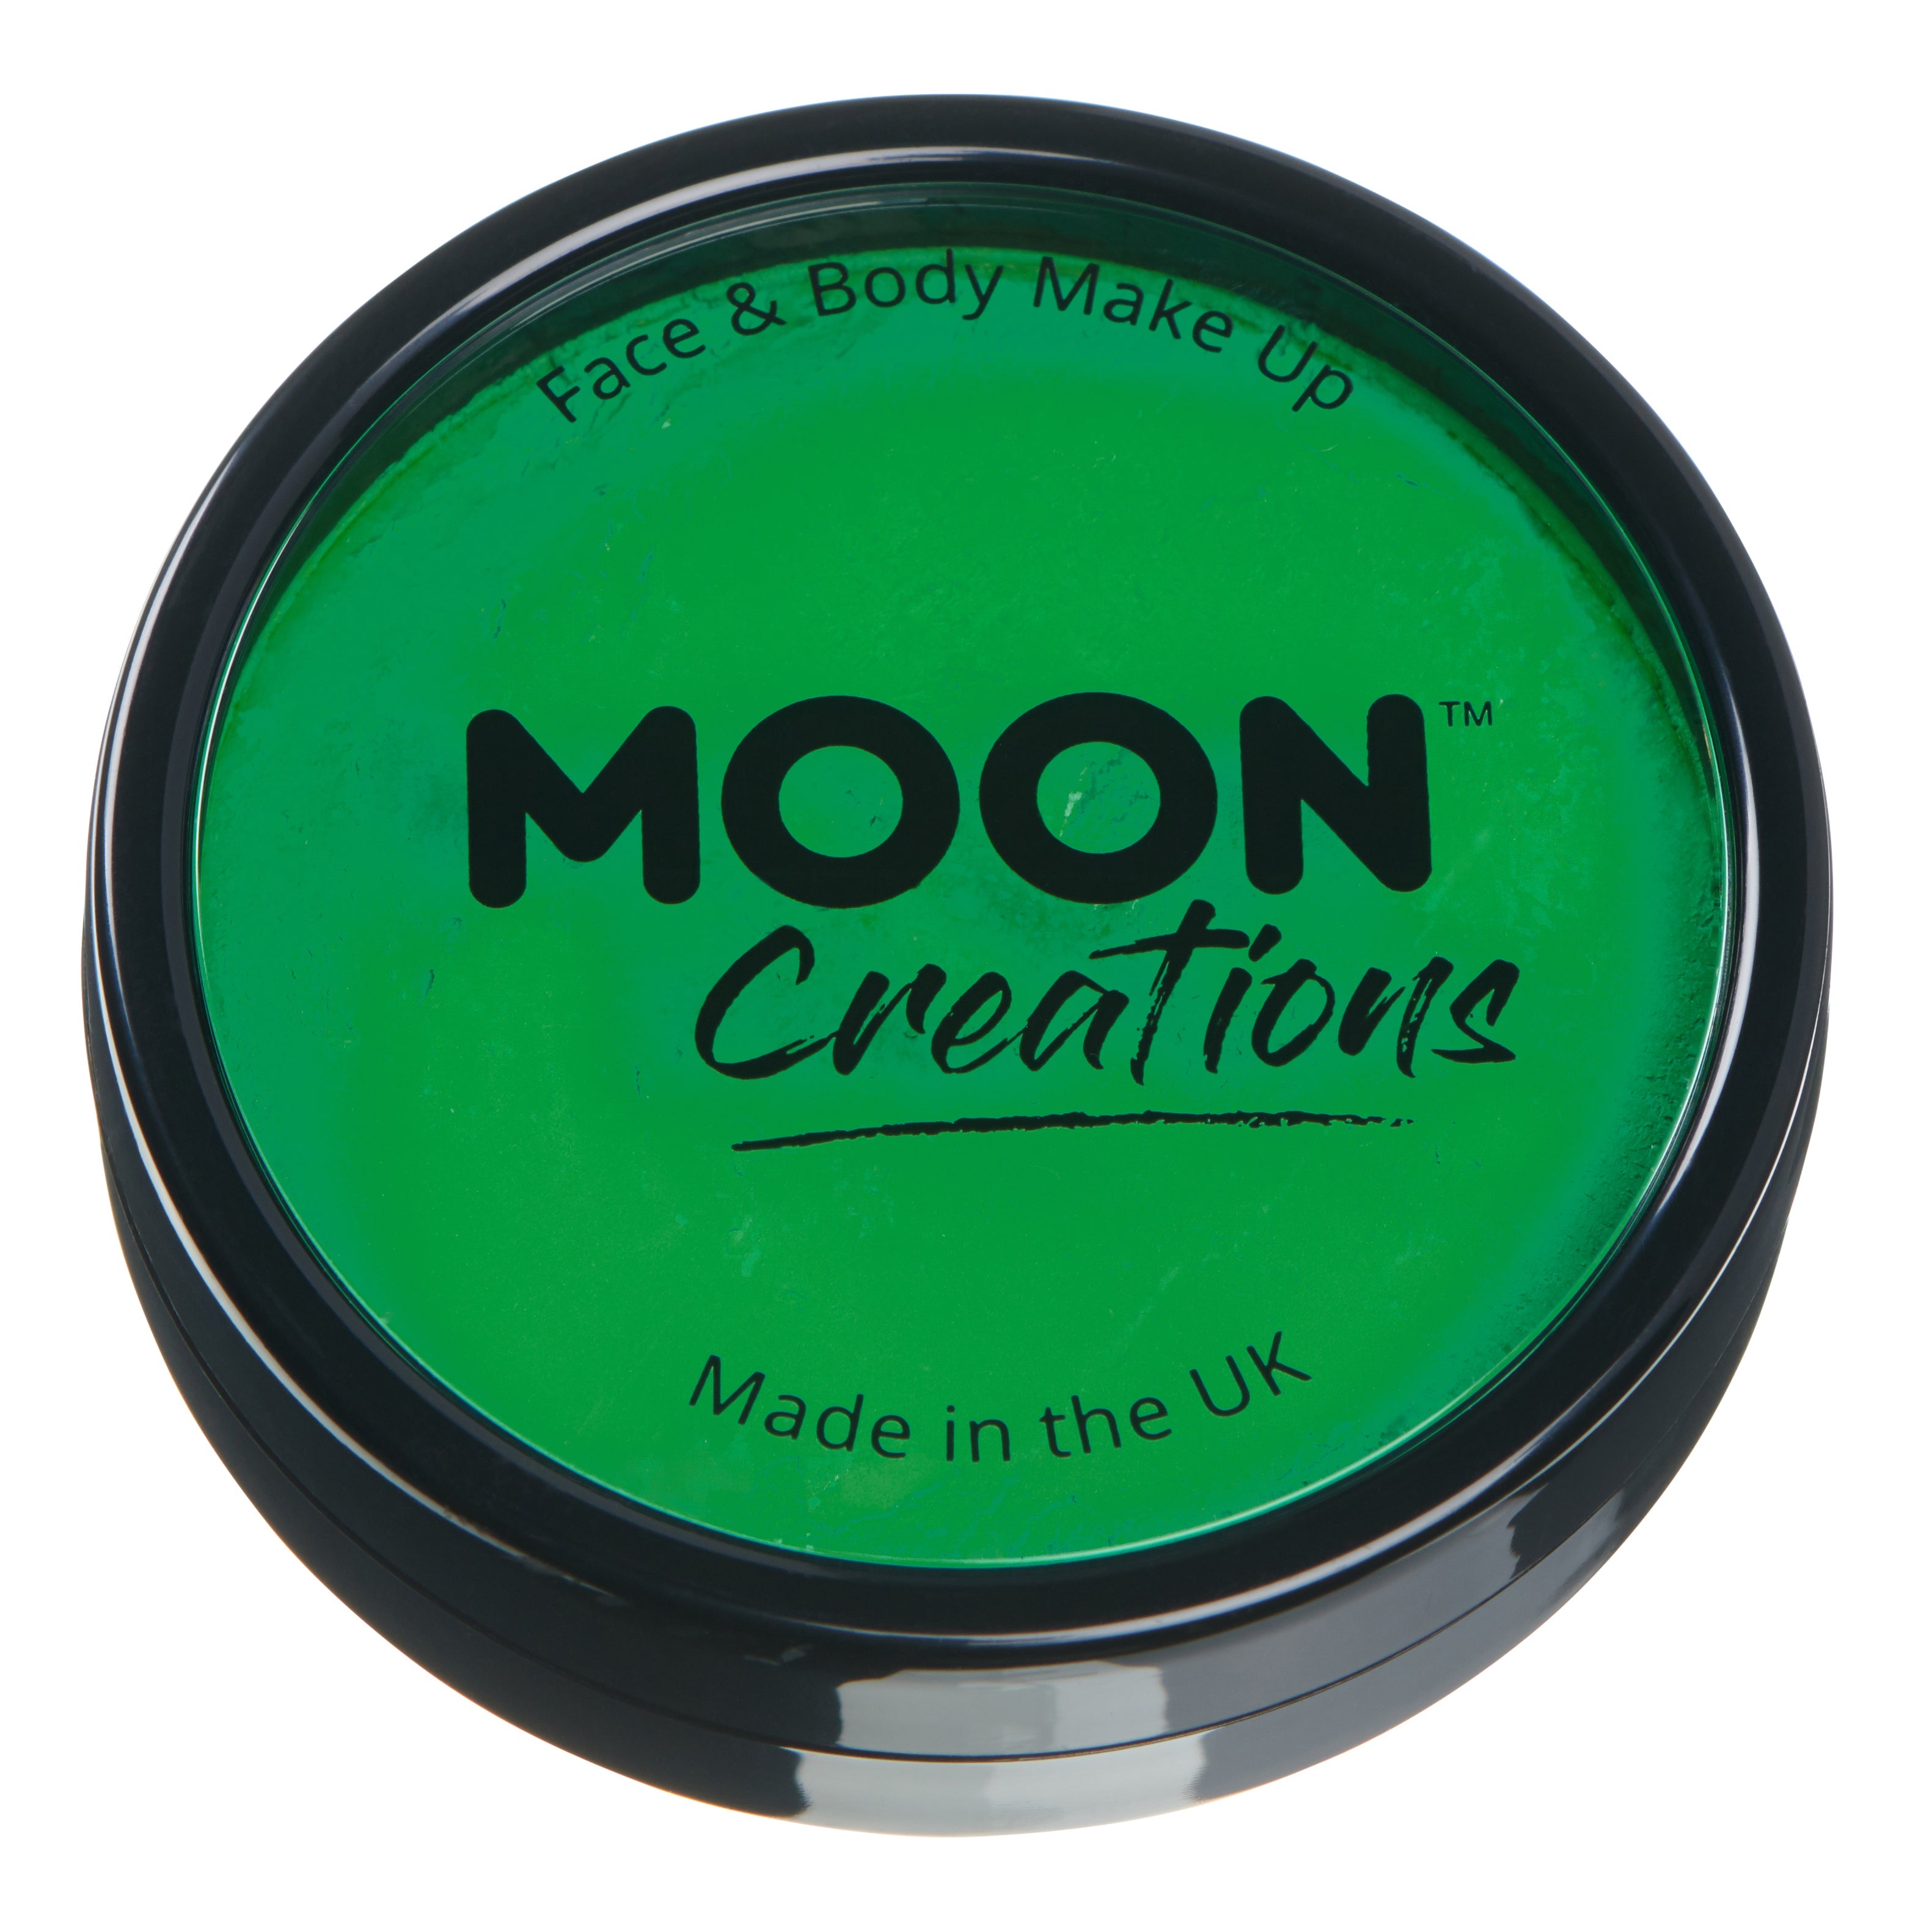 Bright Green - Professional Face Paint, 36g. Cosmetically certified, FDA & Health Canada compliant, cruelty free and vegan.